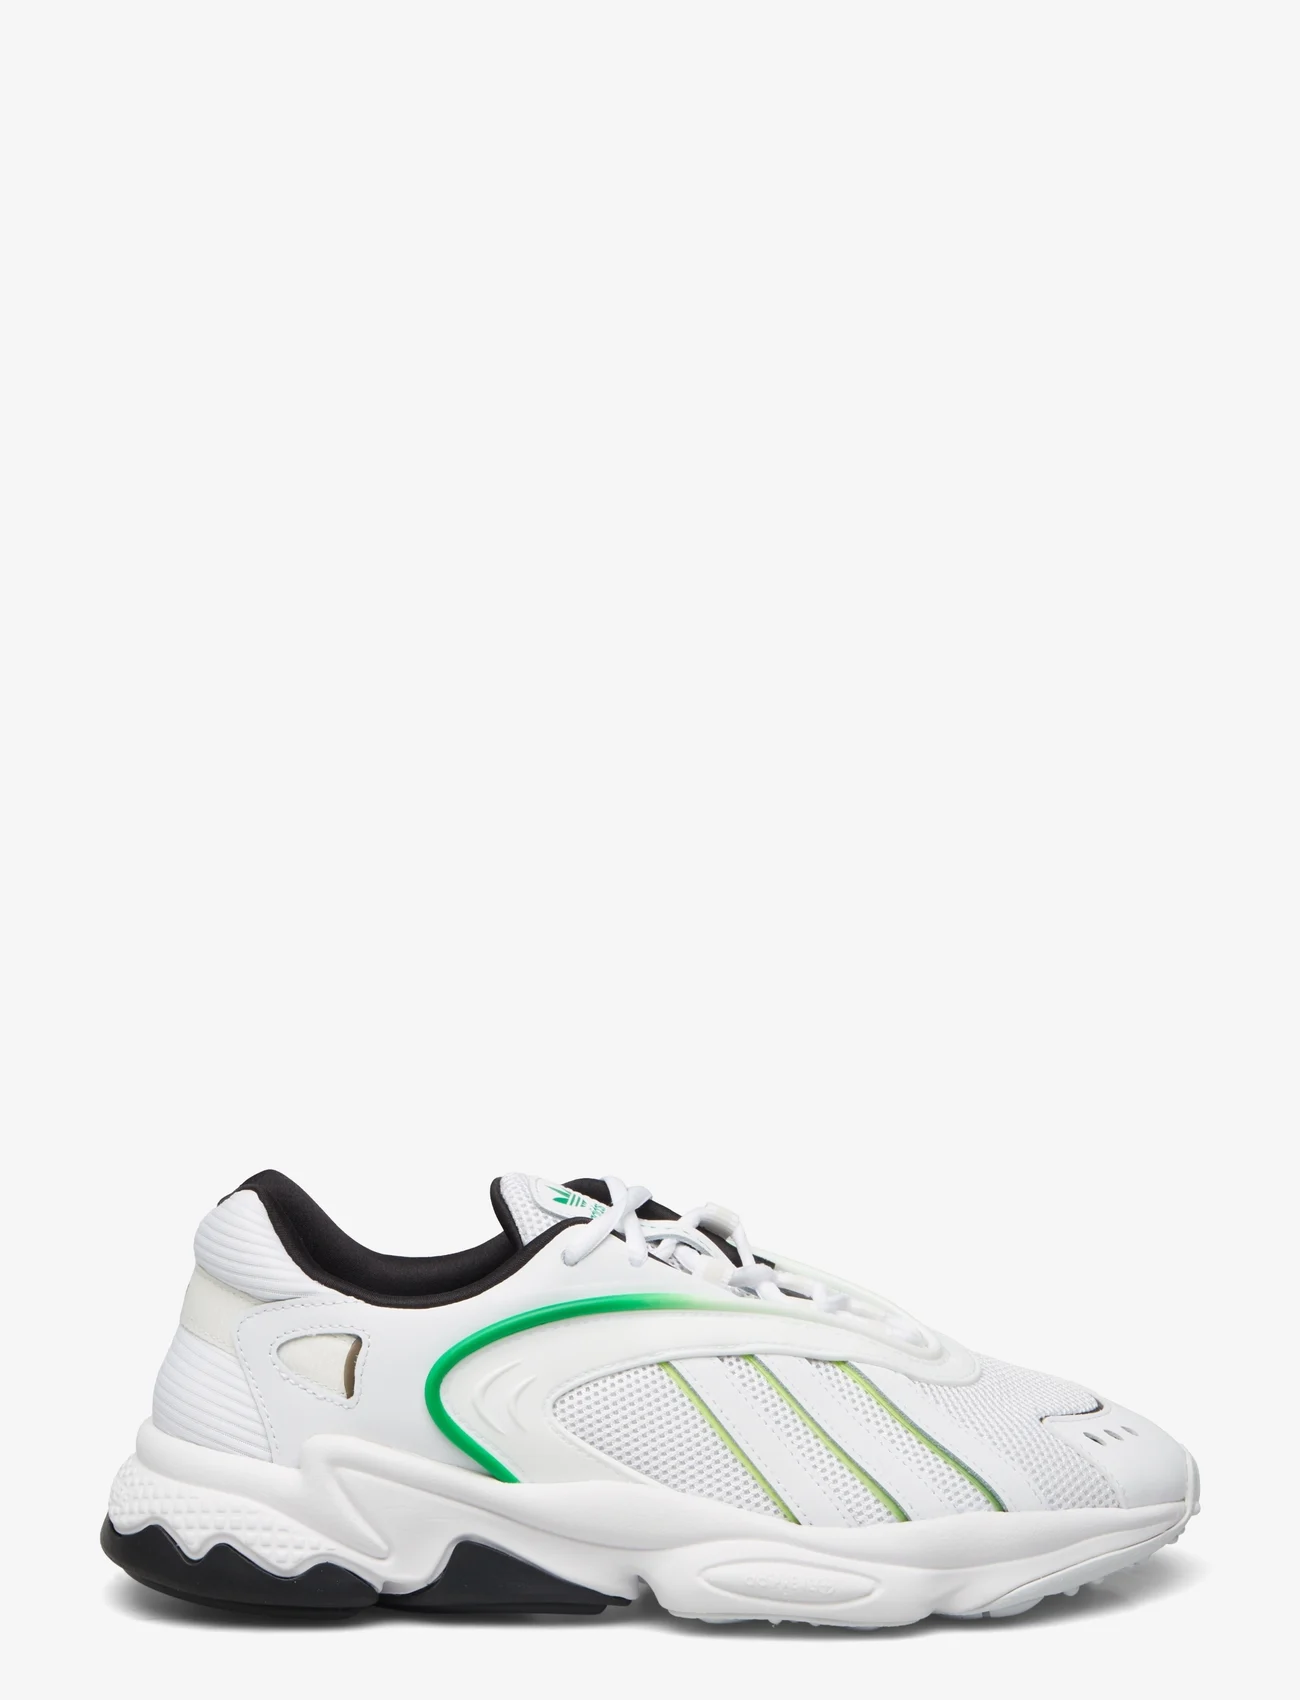 adidas Originals - OZTRAL - niedrige sneakers - ftwwht/cwhite/green - 1